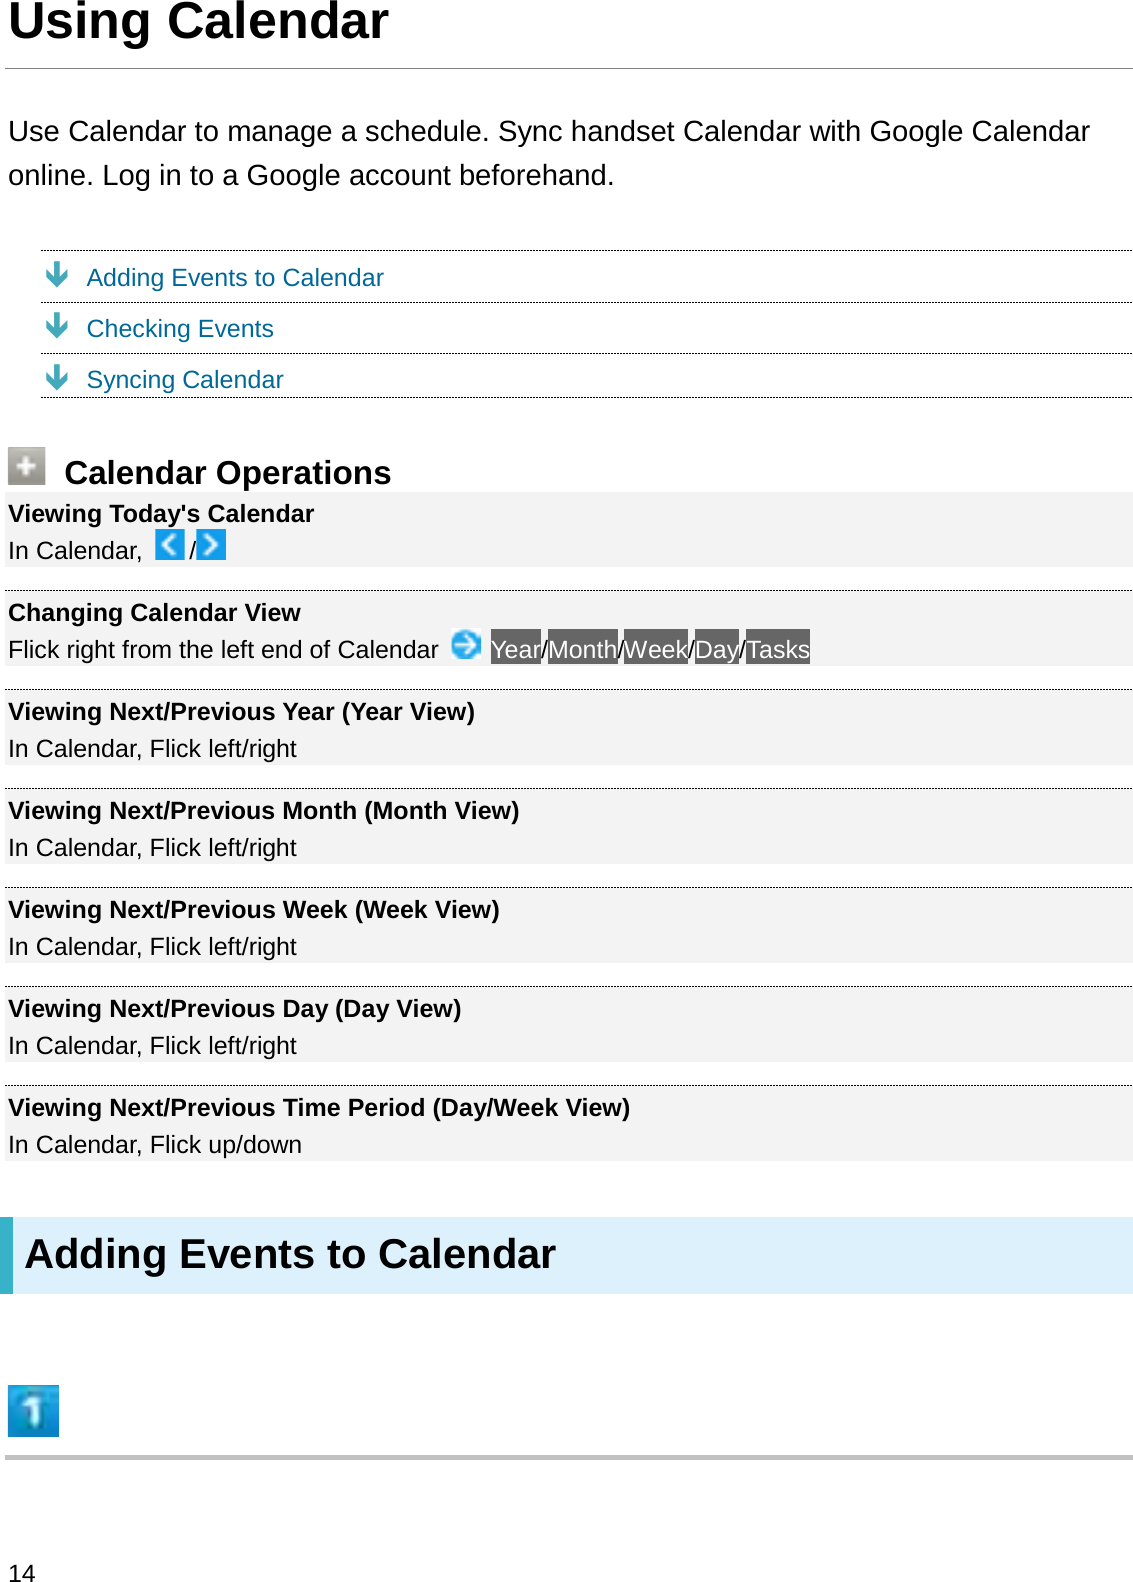 Using CalendarUse Calendar to manage a schedule. Sync handset Calendar with Google Calendar online. Log in to a Google account beforehand.ÐAdding Events to CalendarÐChecking EventsÐSyncing CalendarCalendar OperationsViewing Today&apos;s CalendarIn Calendar,  /Changing Calendar ViewFlick right from the left end of Calendar  Year/Month/Week/Day/TasksViewing Next/Previous Year (Year View)In Calendar, Flick left/rightViewing Next/Previous Month (Month View)In Calendar, Flick left/rightViewing Next/Previous Week (Week View)In Calendar, Flick left/rightViewing Next/Previous Day (Day View)In Calendar, Flick left/rightViewing Next/Previous Time Period (Day/Week View)In Calendar, Flick up/downAdding Events to Calendar14